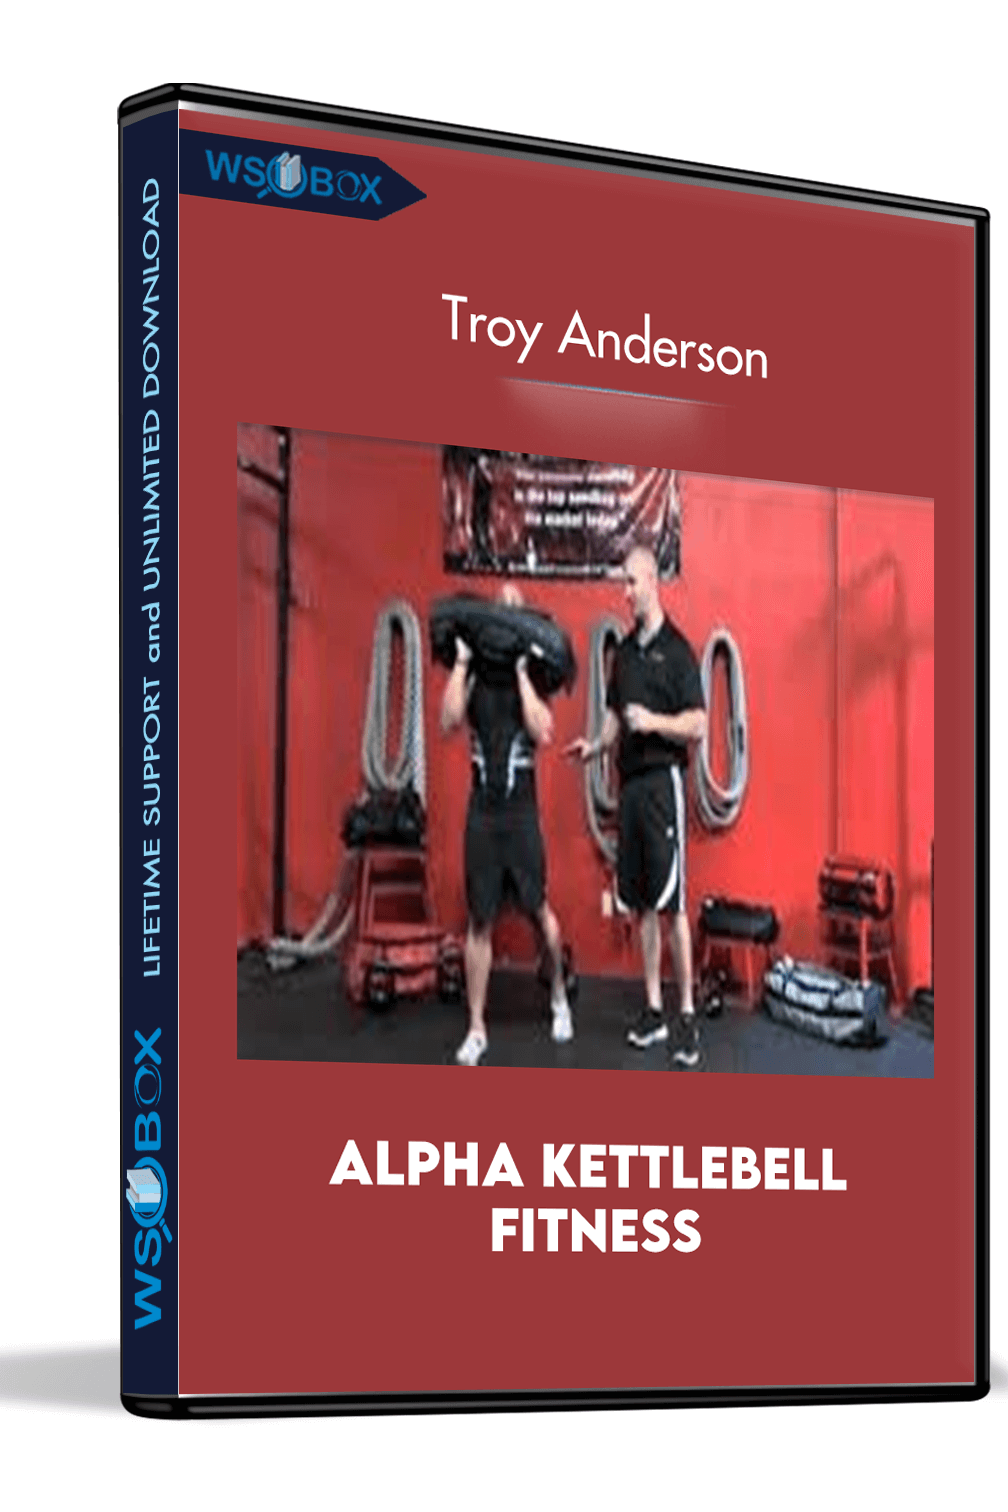 Alpha Kettlebell Fitness - Troy Anderson